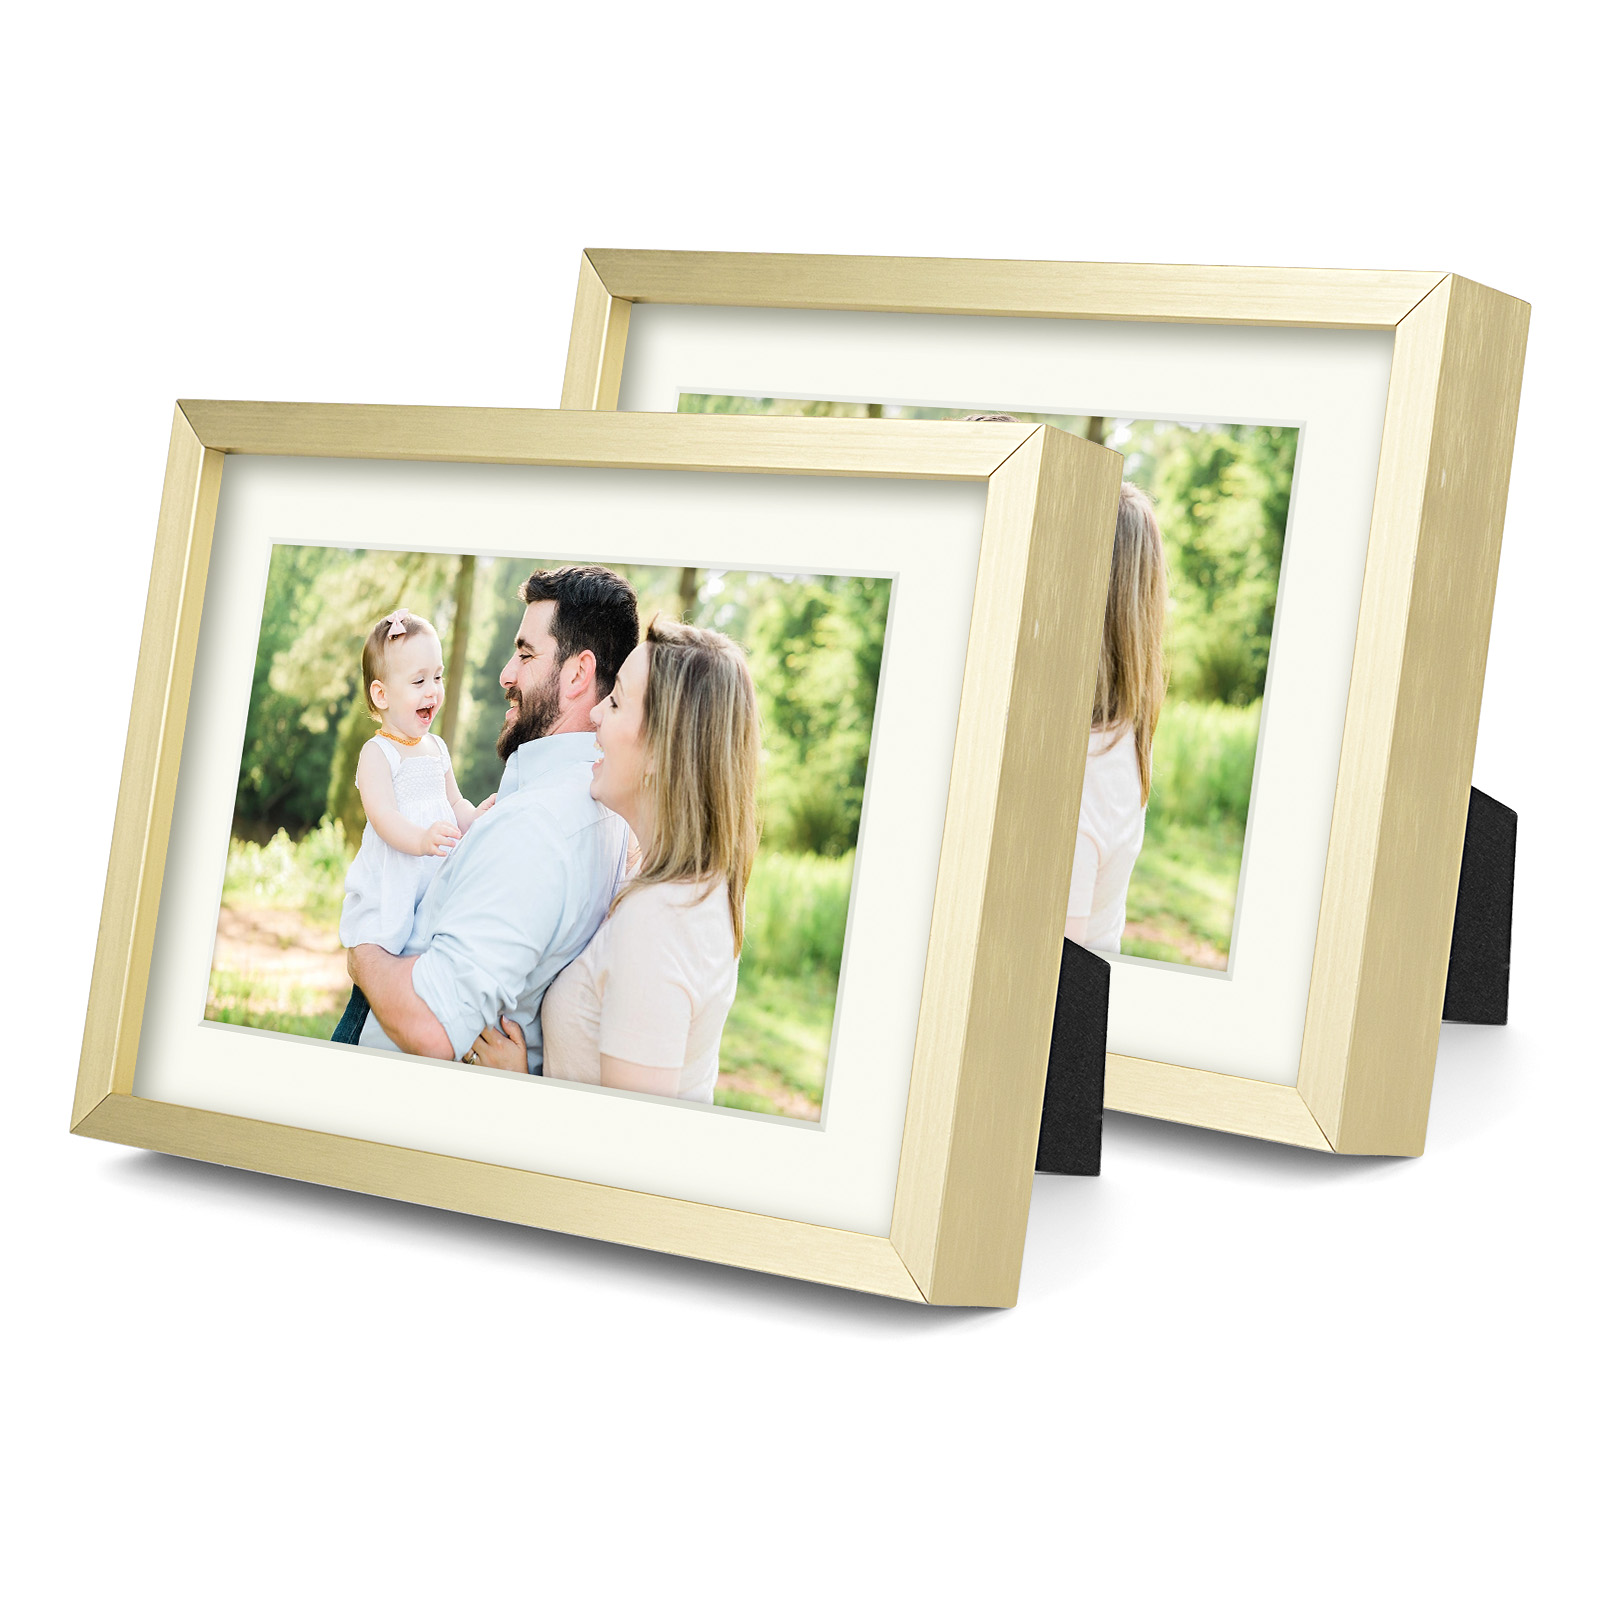 Decor Home Aluminum Photo Frames with Two 8x10, Four 7x5, Four 6x4 - 10 Pack - Gold